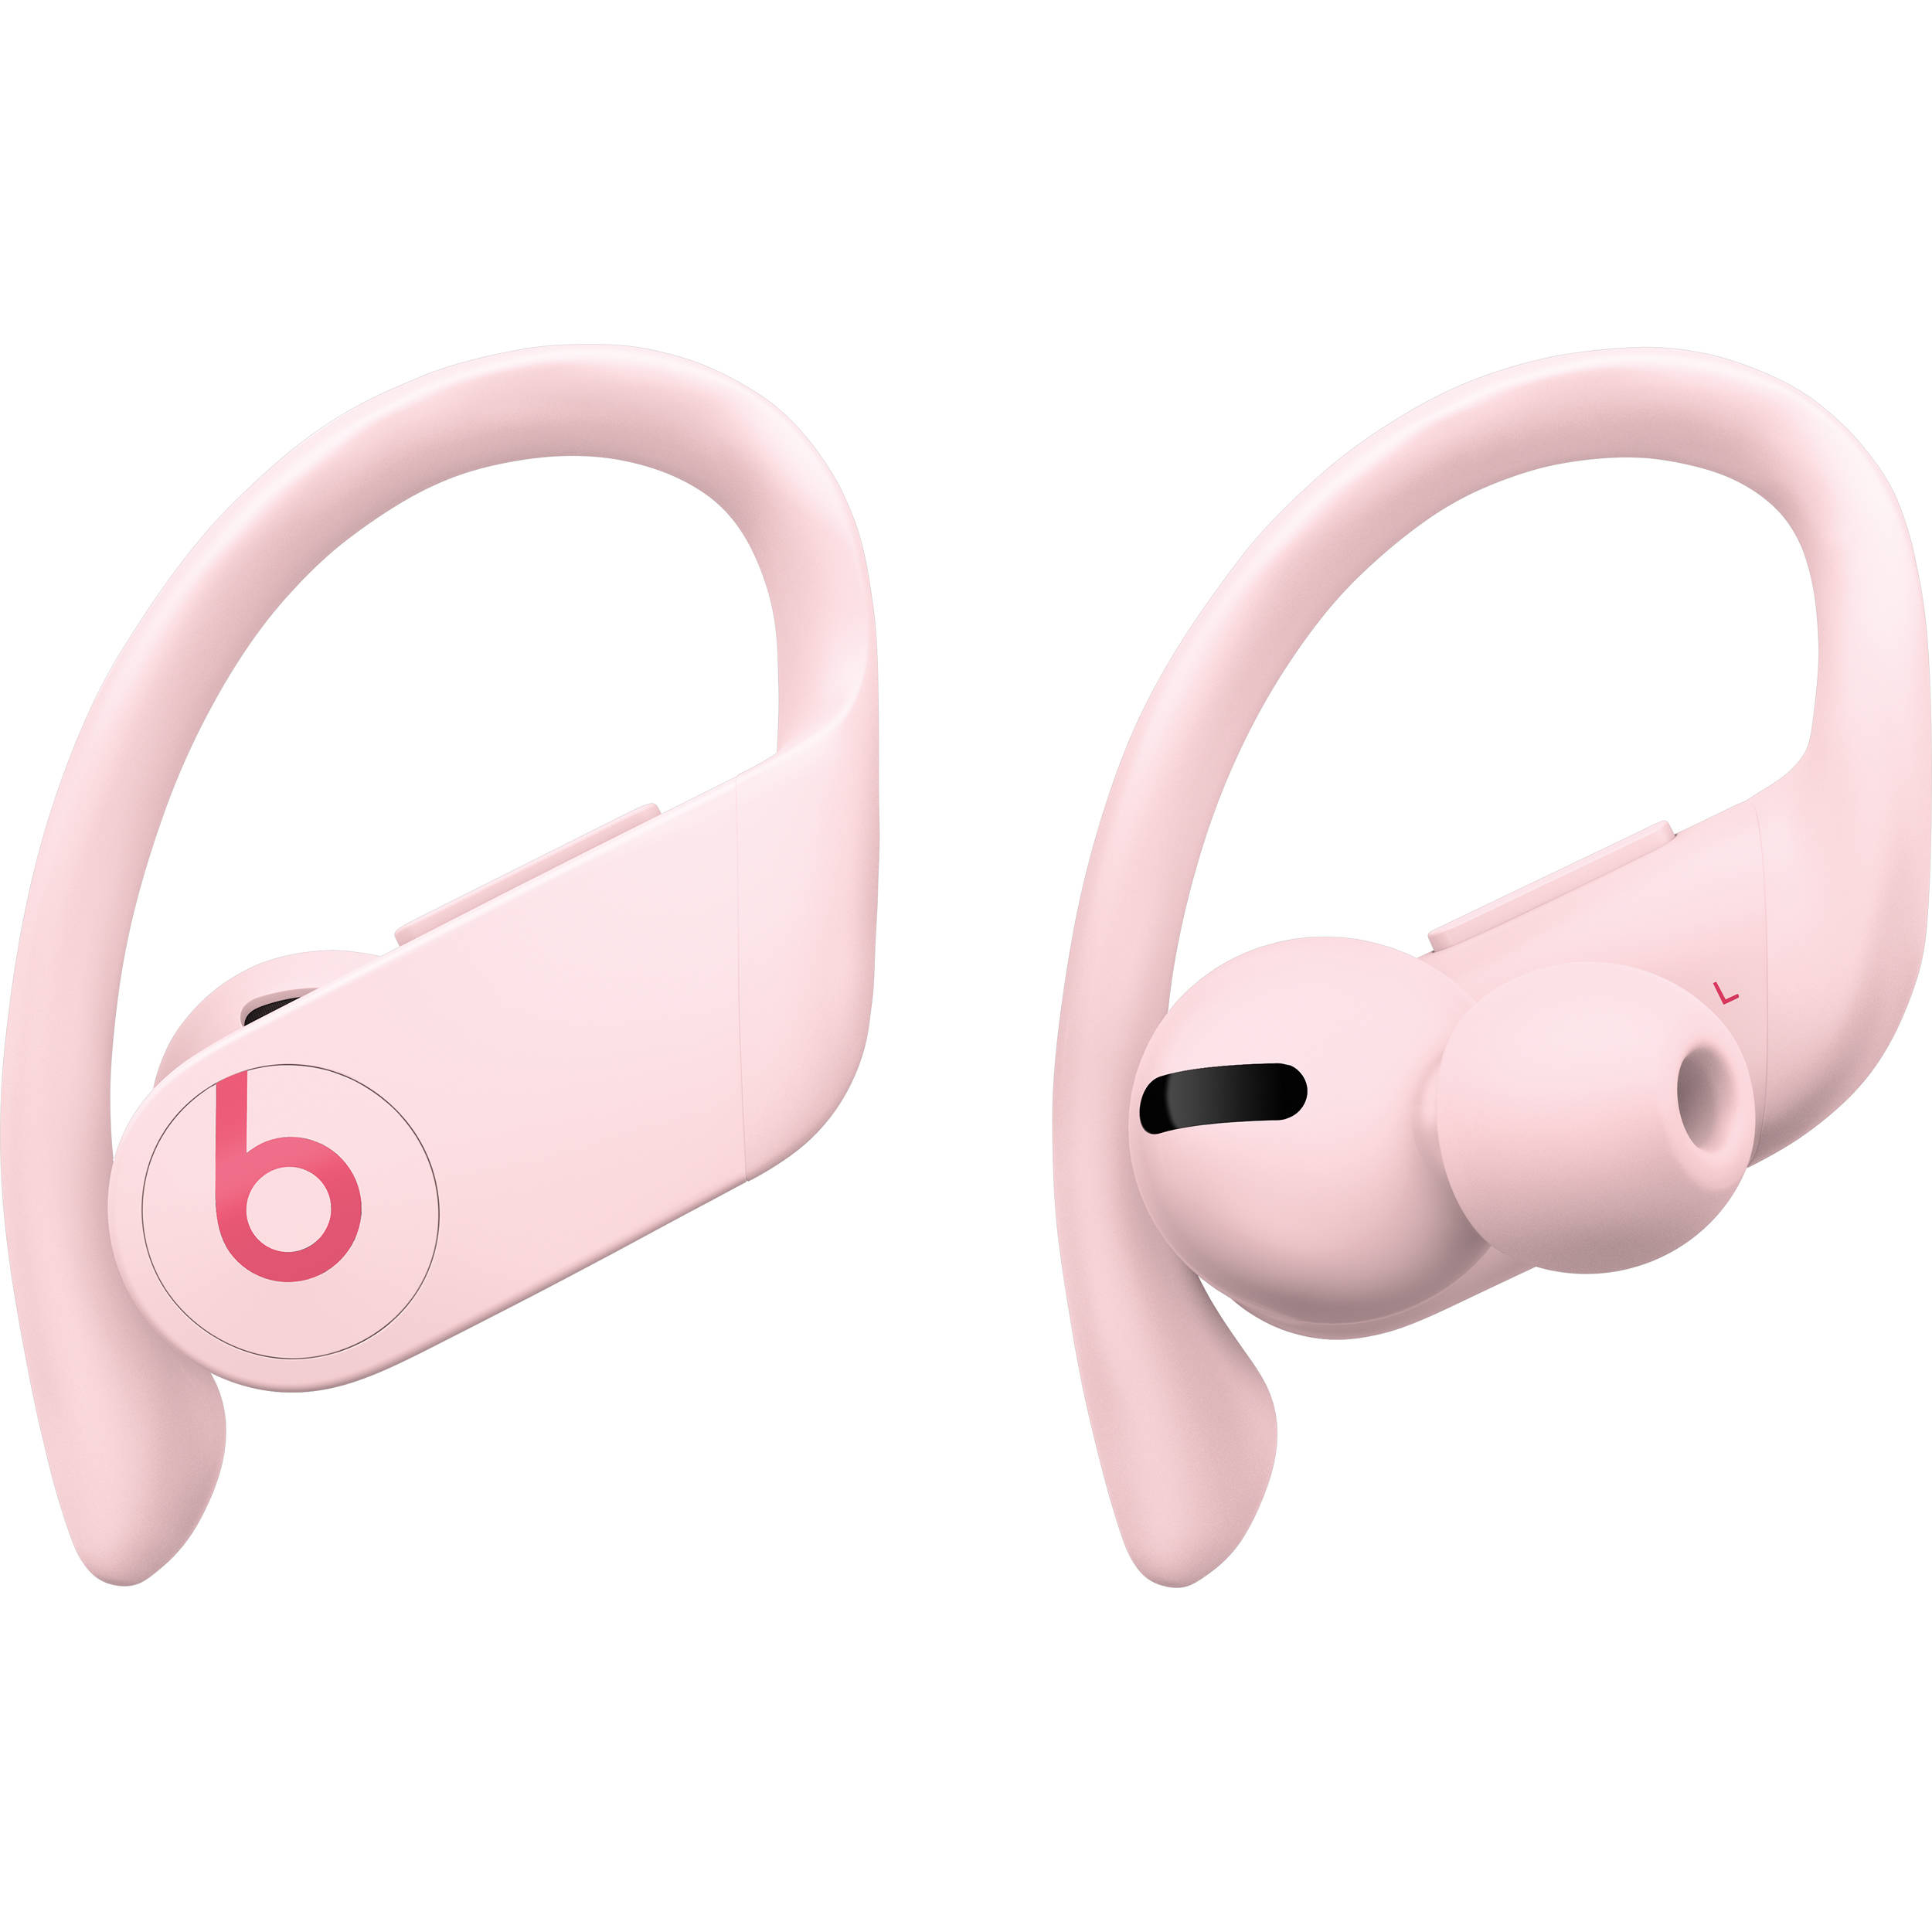 beats by dr dre pink